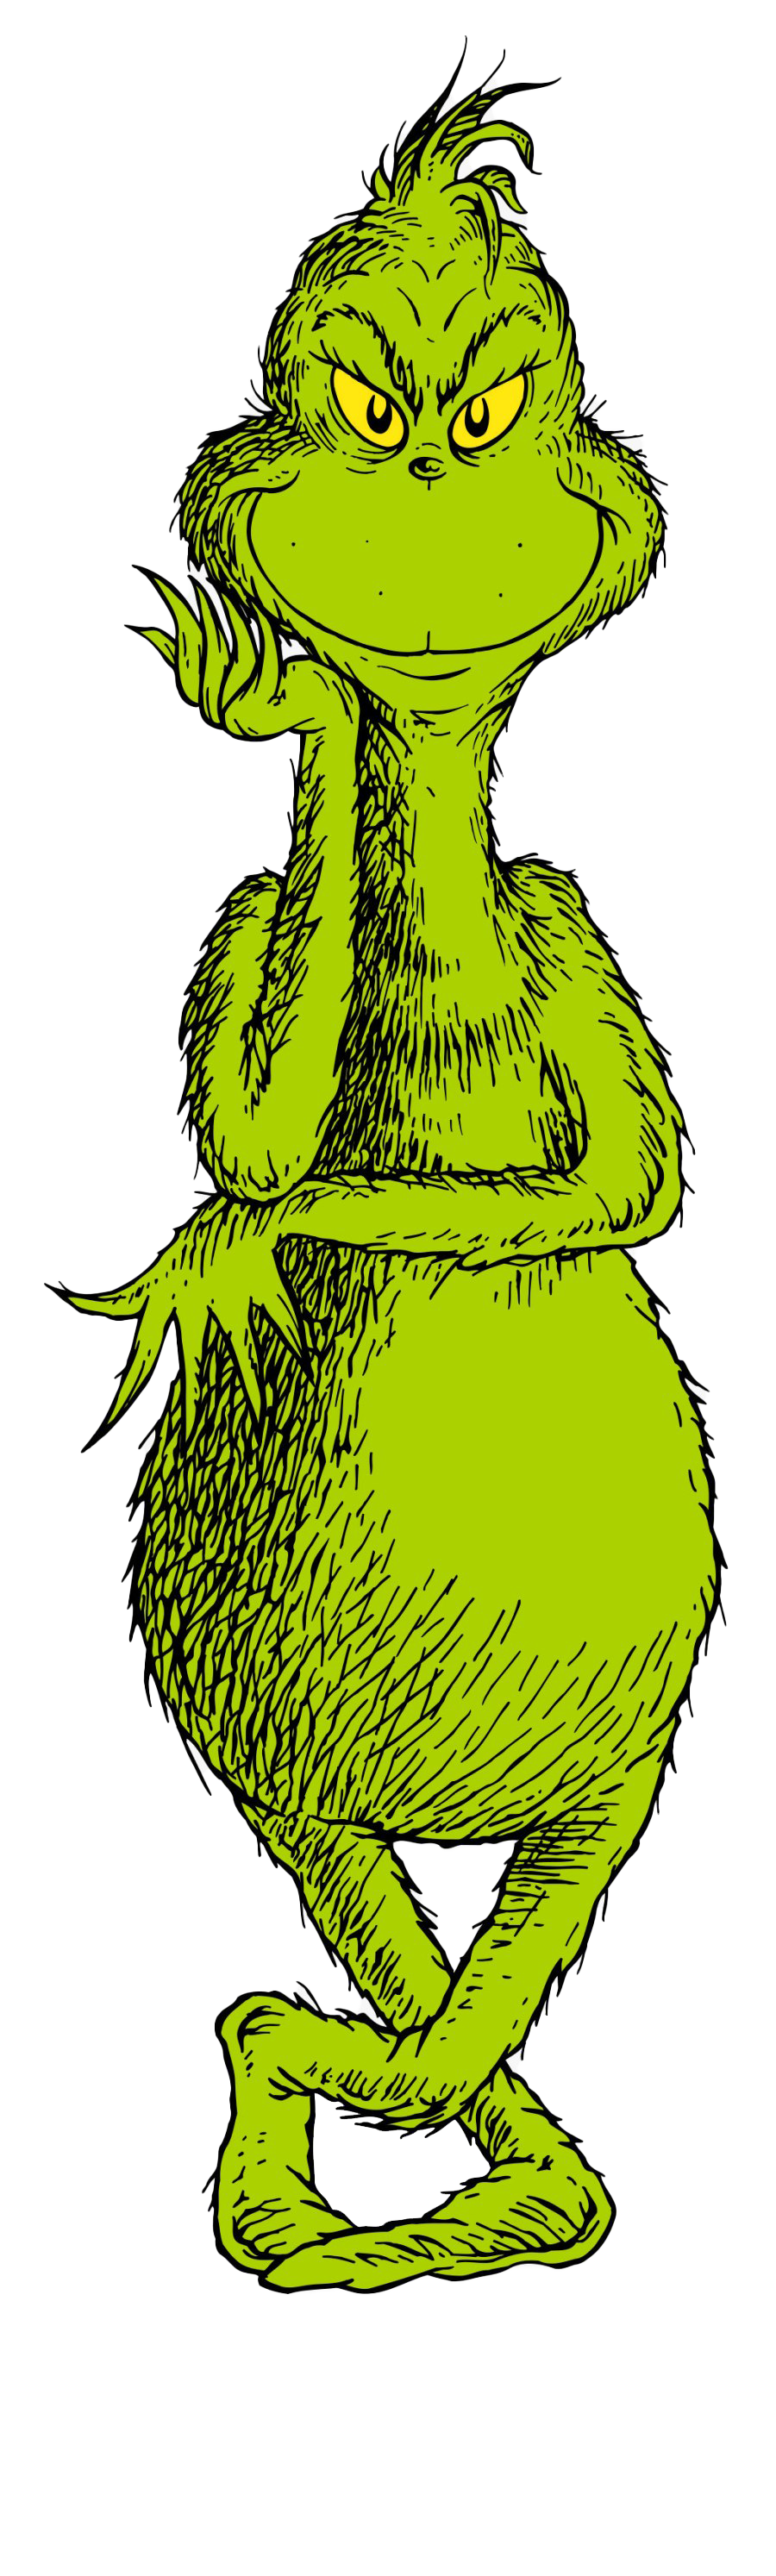 Grinch The Photos Free HQ Image PNG Image